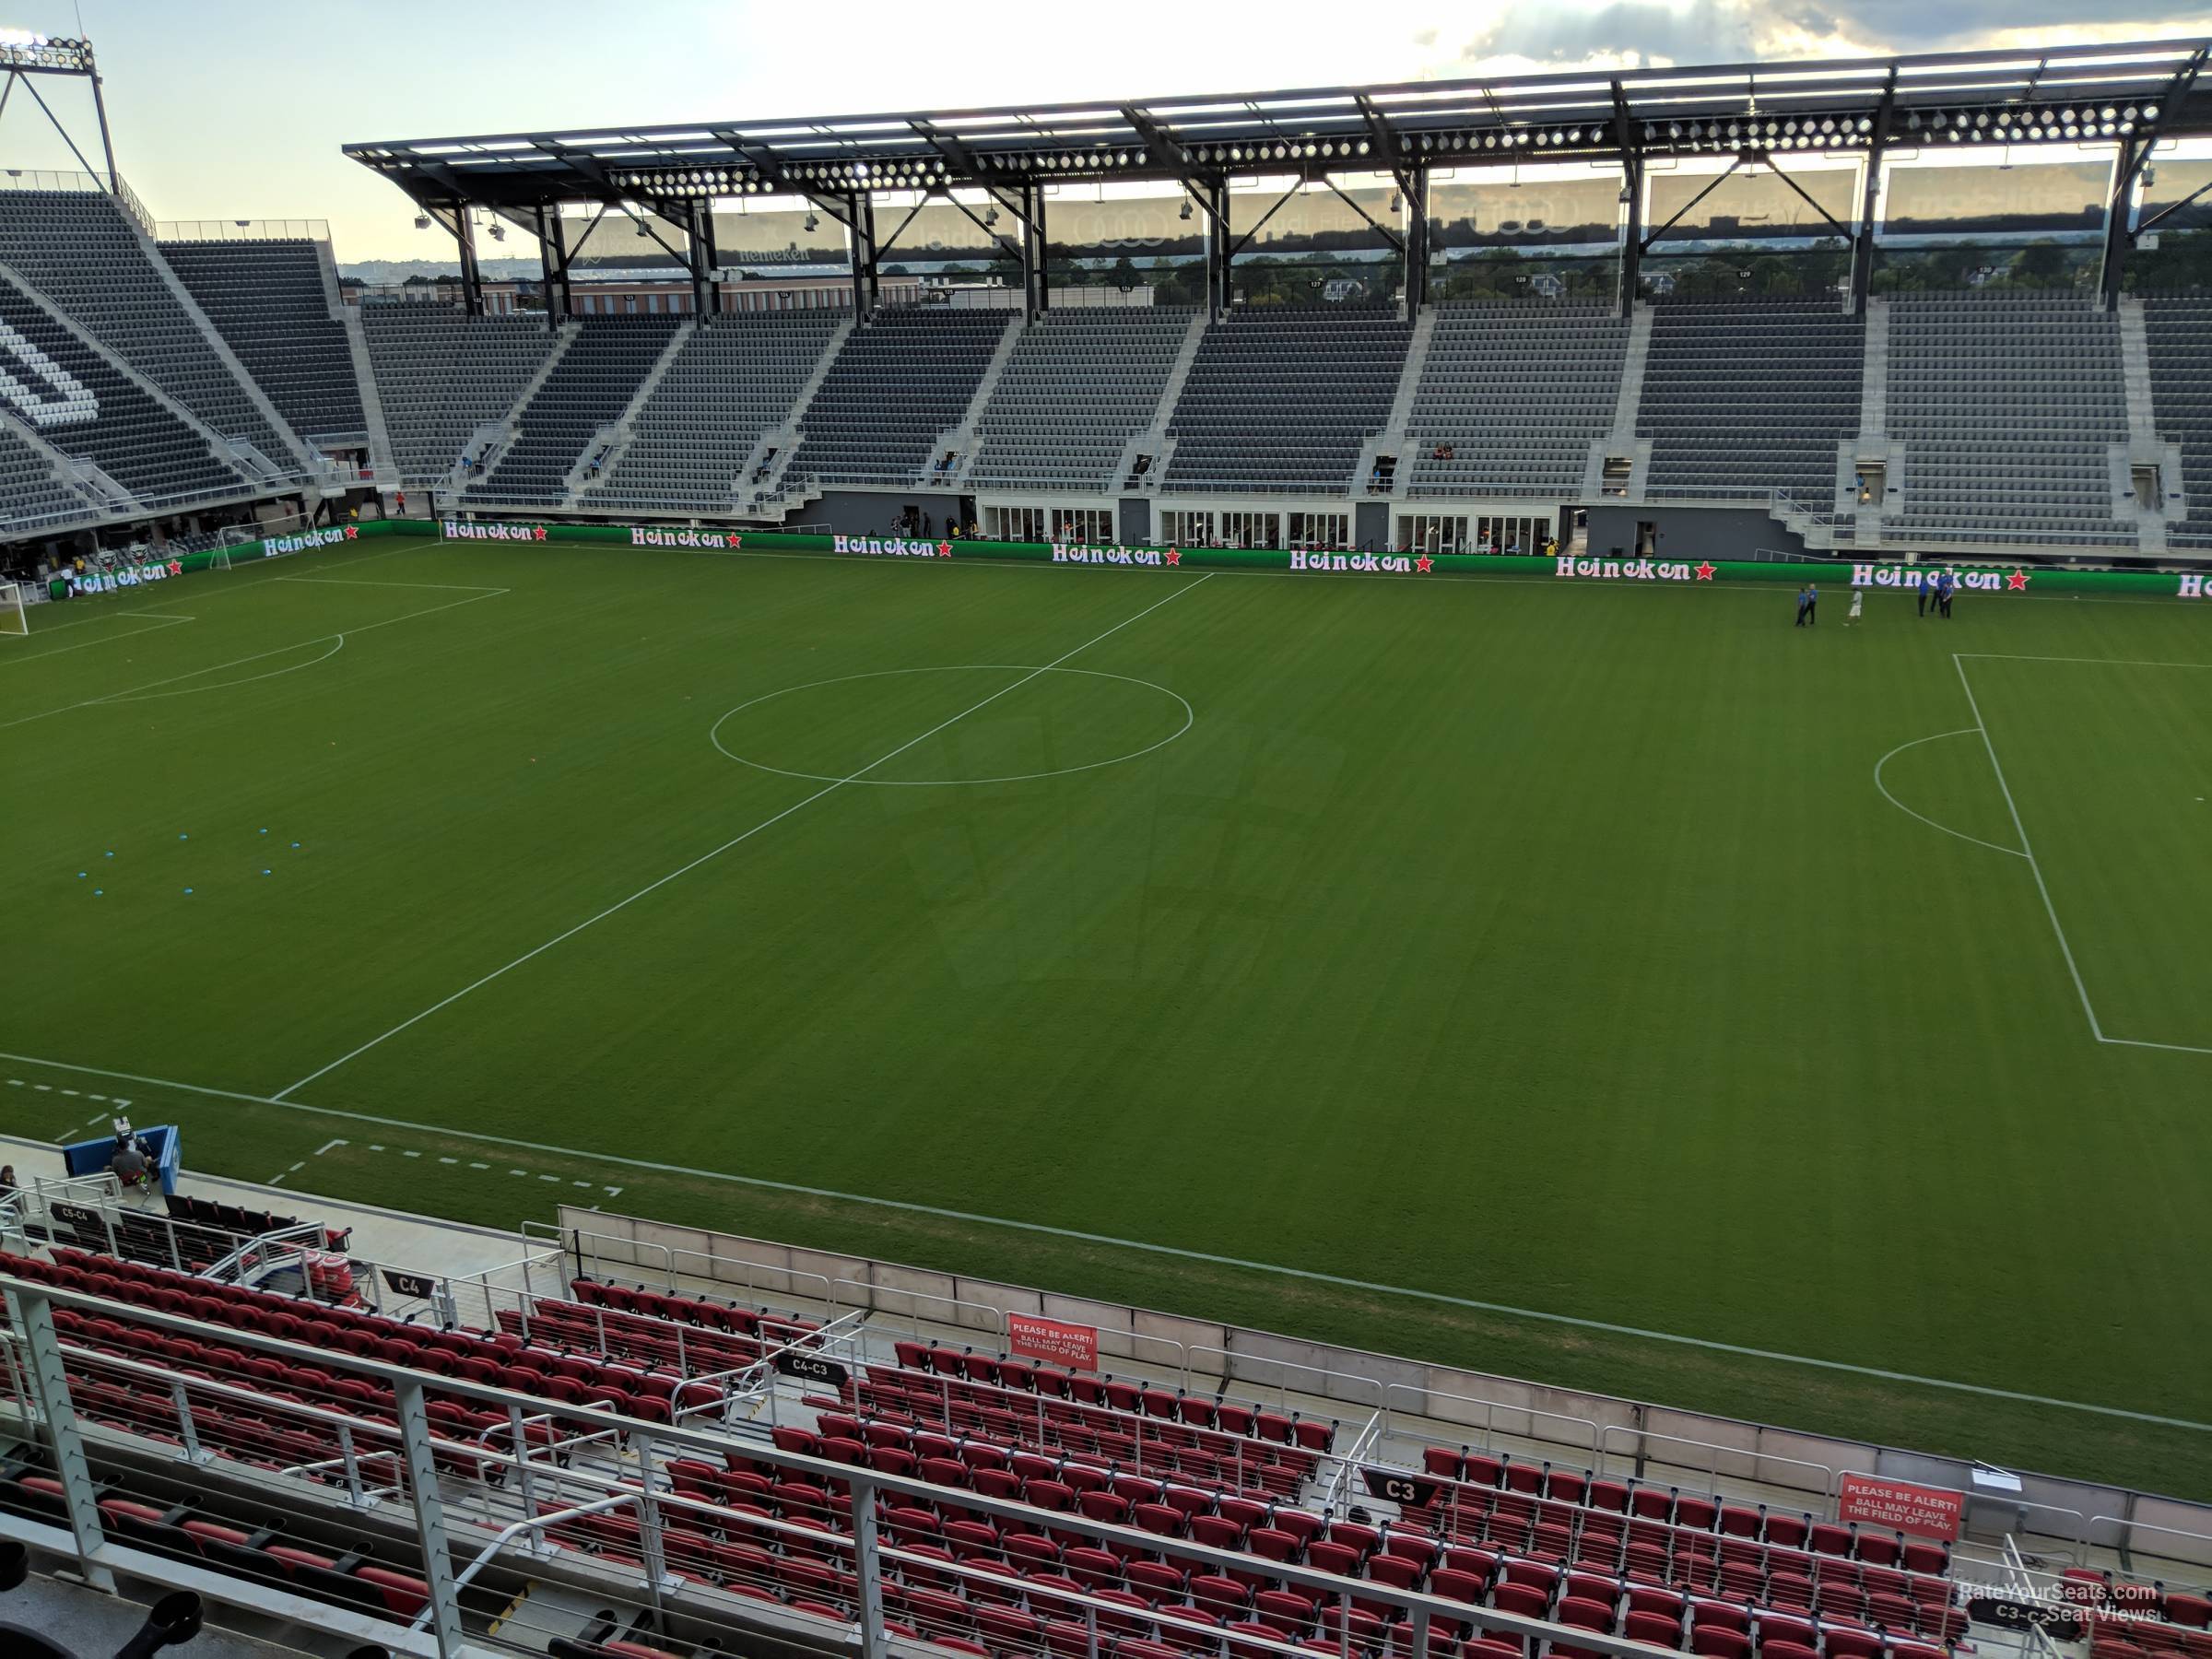 section 104, row 4 seat view  - audi field